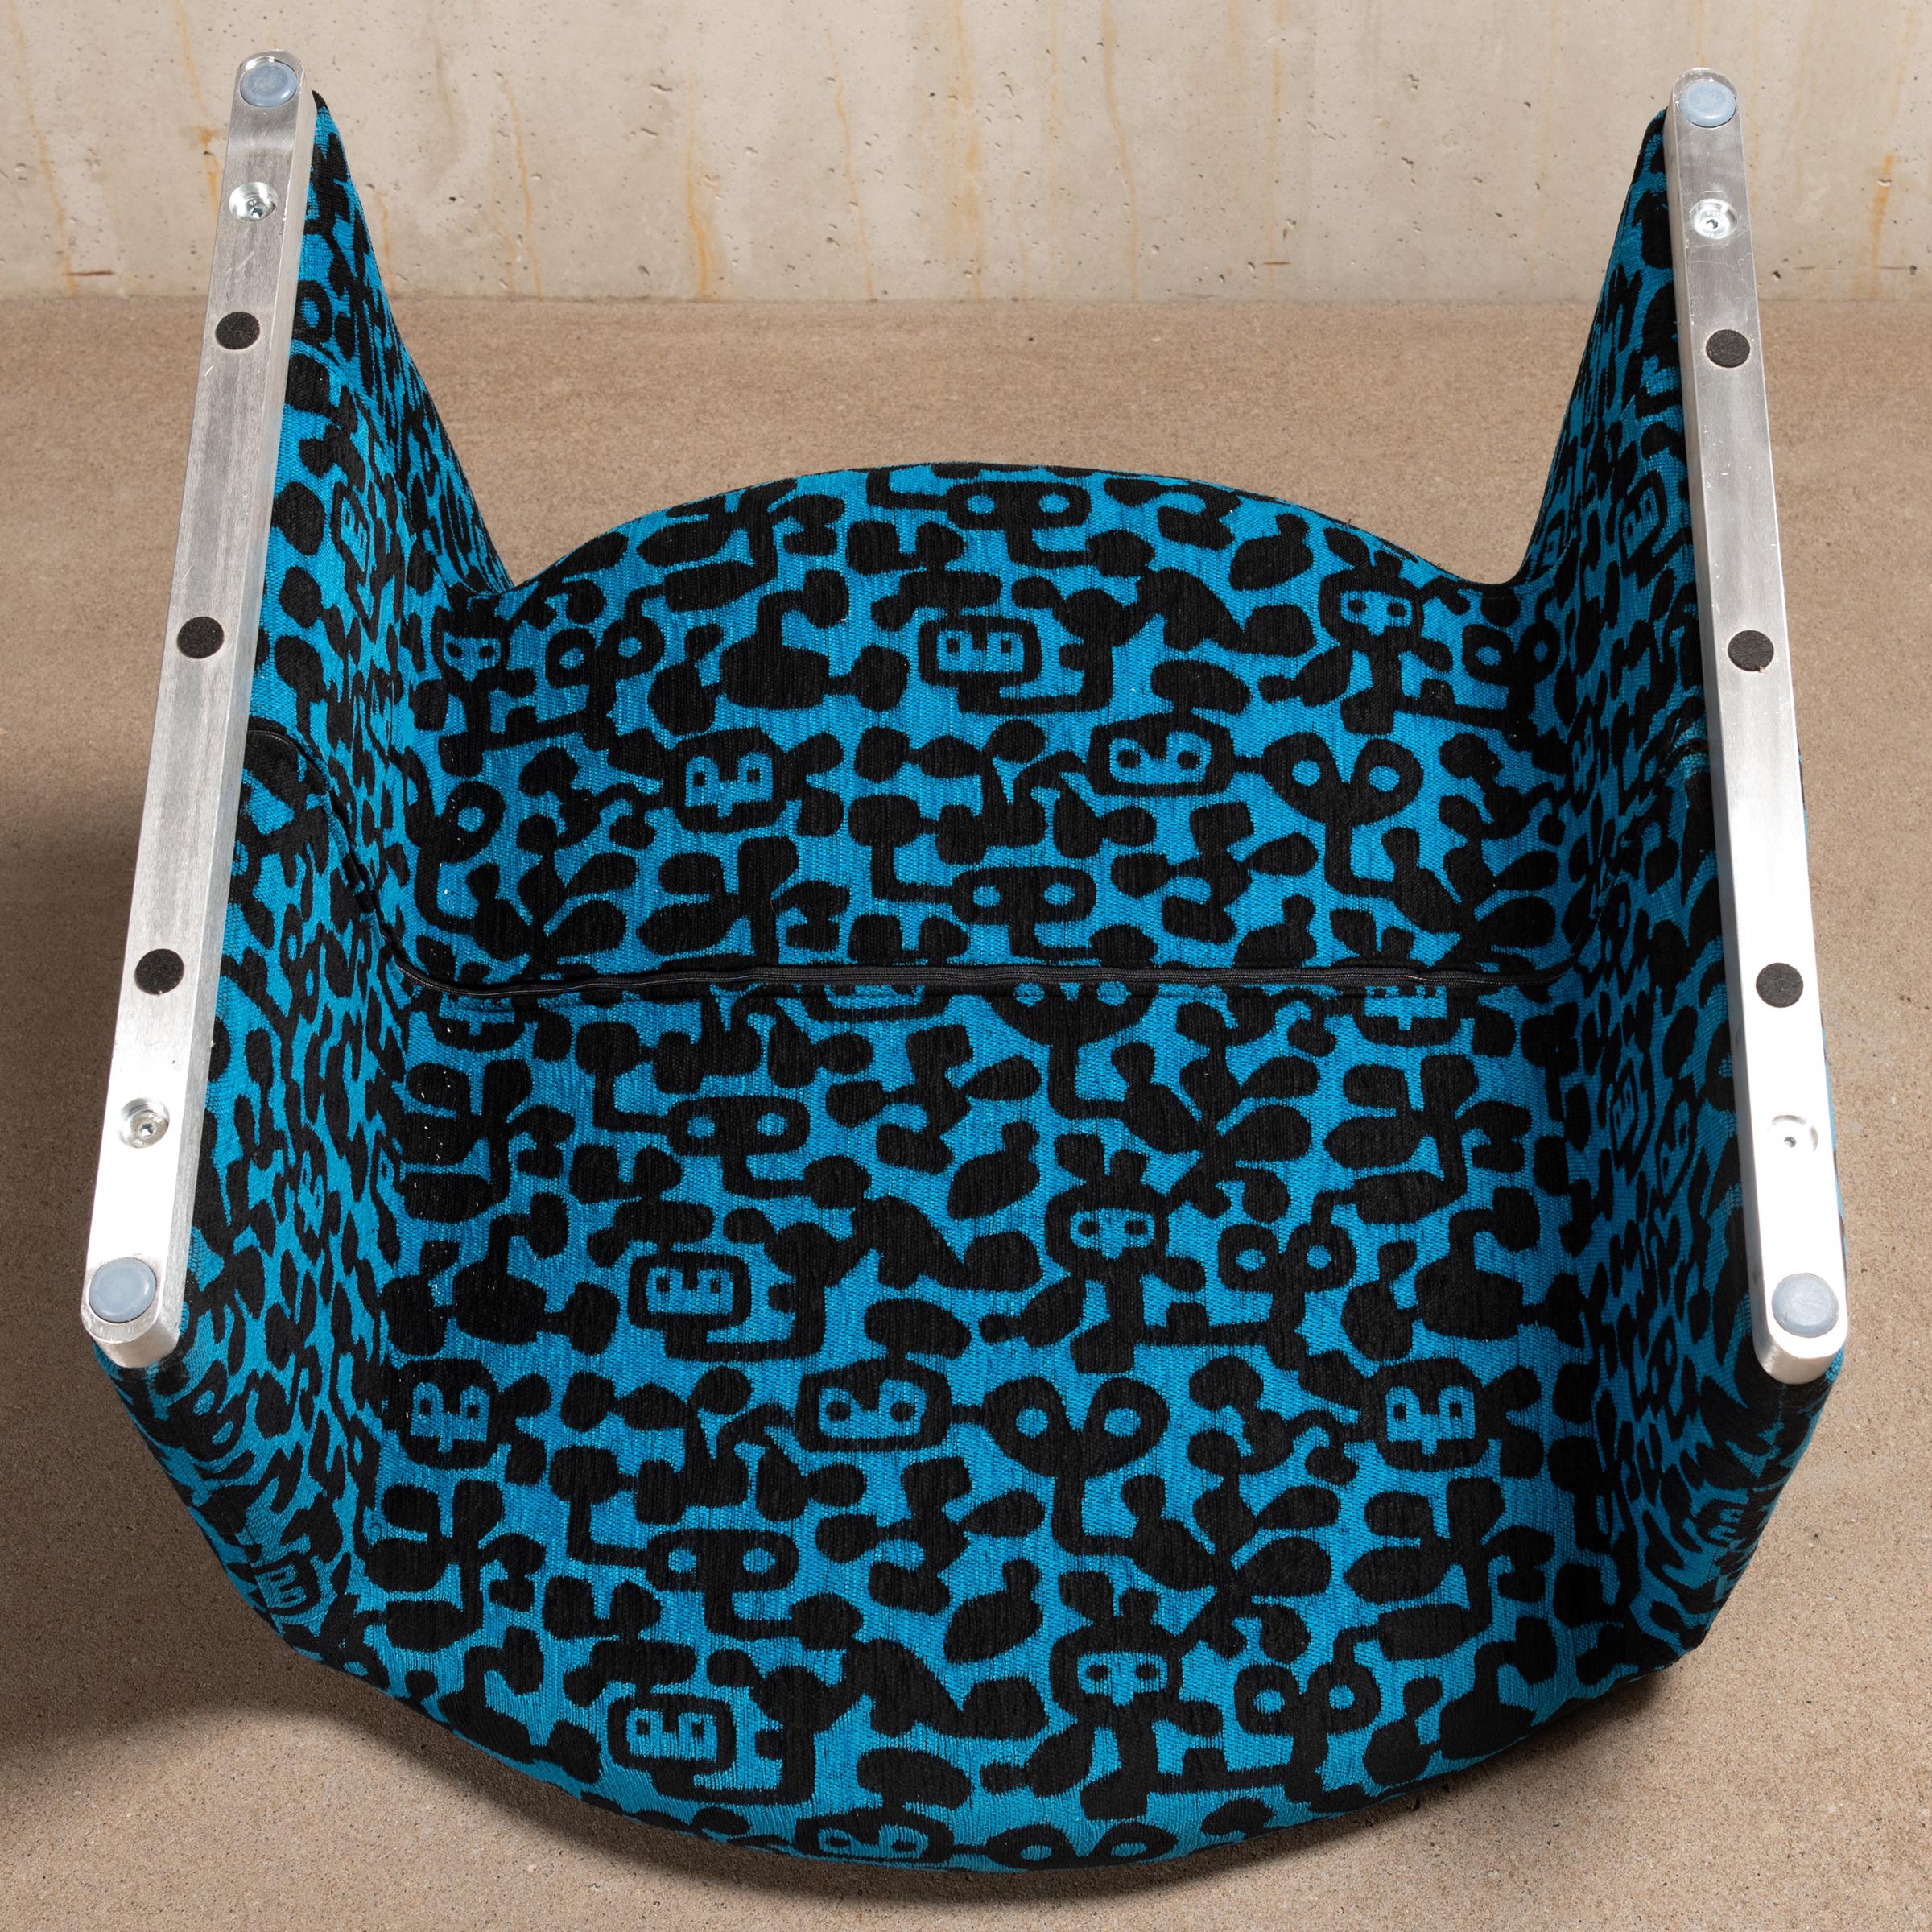 Giancarlo Piretti Alky Lounge Chair in Blue Fabric with Black Pattern, Artifort 10